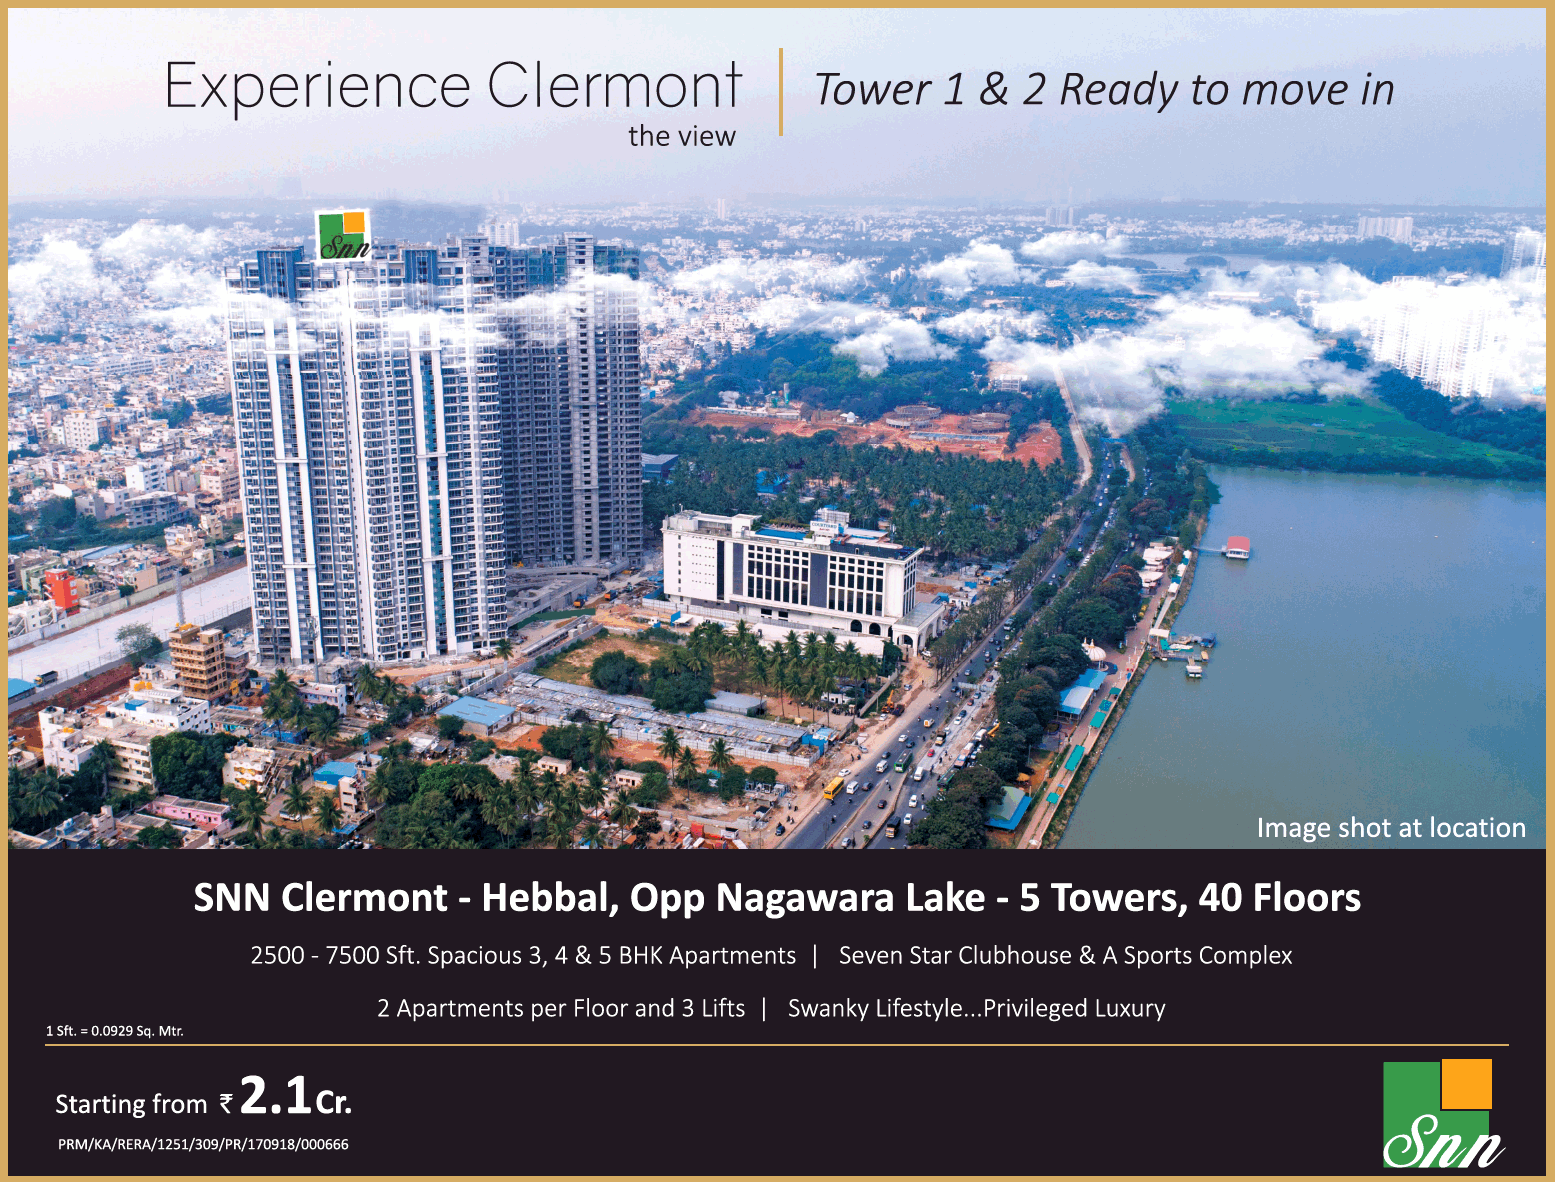 Book ready to move in apartments in tower 1 & 2 at SNN Clermont in Bangalore Update